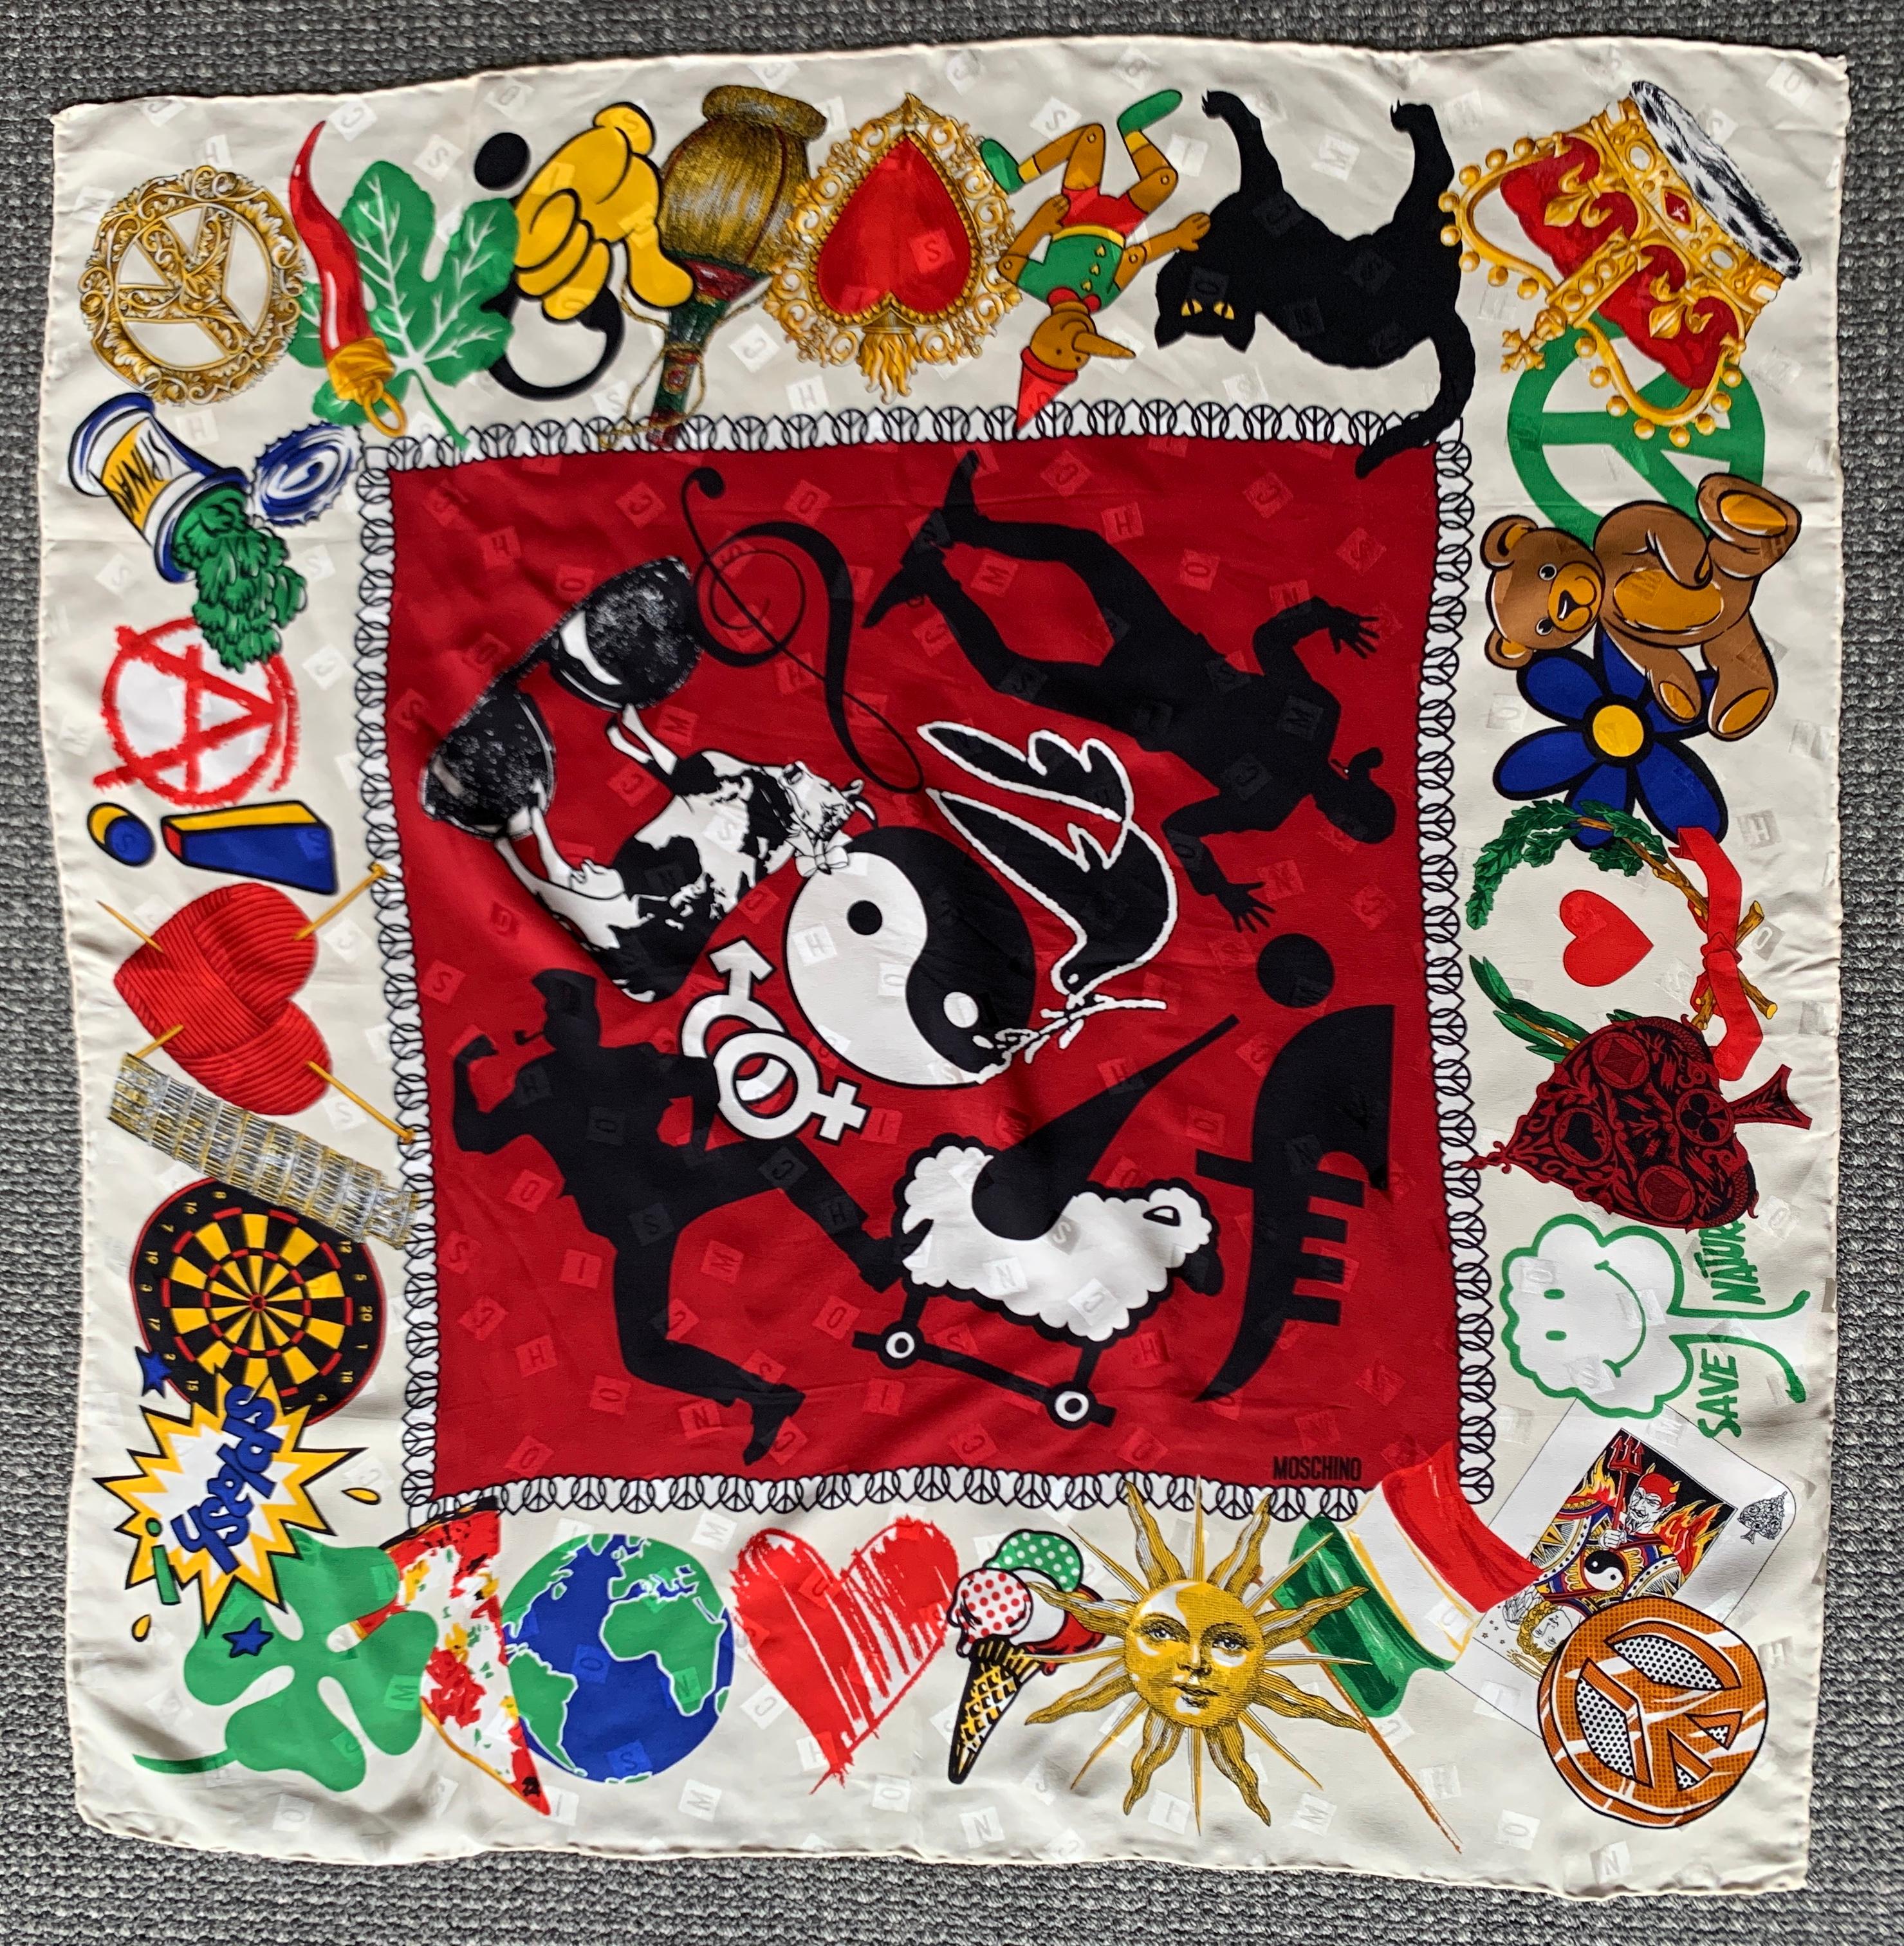 Vintage Moschino silk scarf featuring a collection of signature Moschino icons, inducing pizza, gelato, peace signs, anarchy symbols, trees, a teddy bear, and more . Weave features blocks spelling M-O-S-C-H-I-N-O throughout. Signed Moschino at